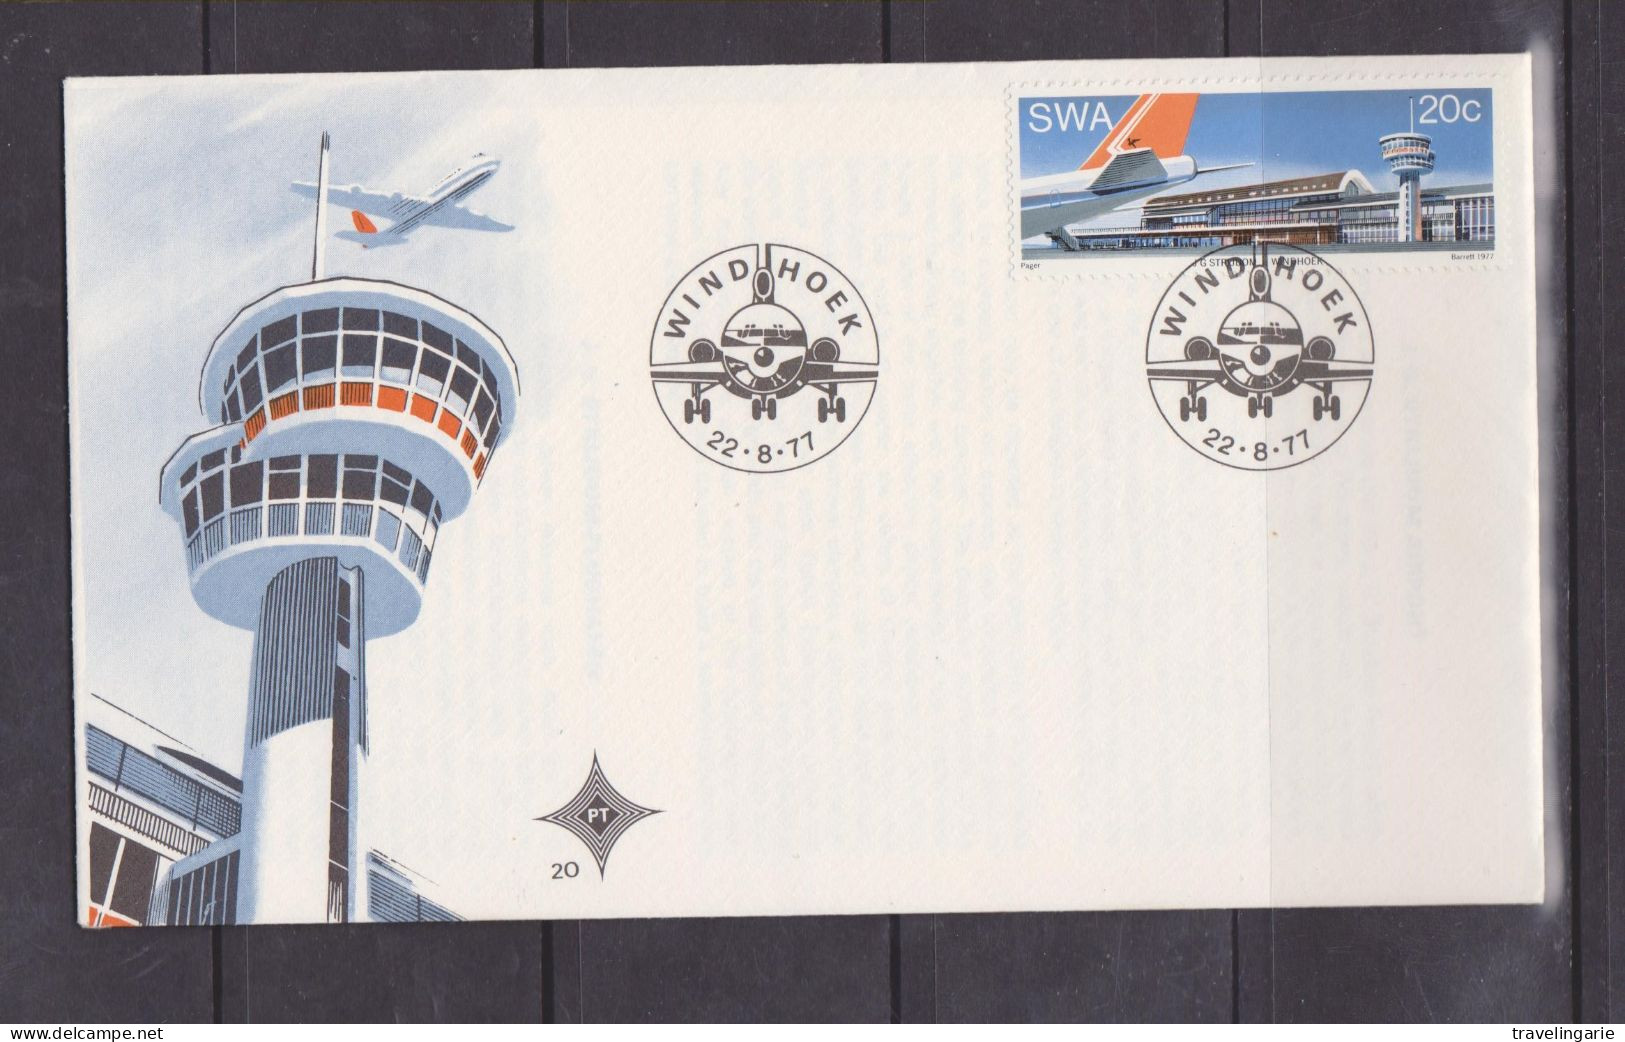 South West Africa 1977 J.G. Strijdom Airport With FDC Nr. 20 With Windhoek Aeroplane Cancel - Zuidwest-Afrika (1923-1990)